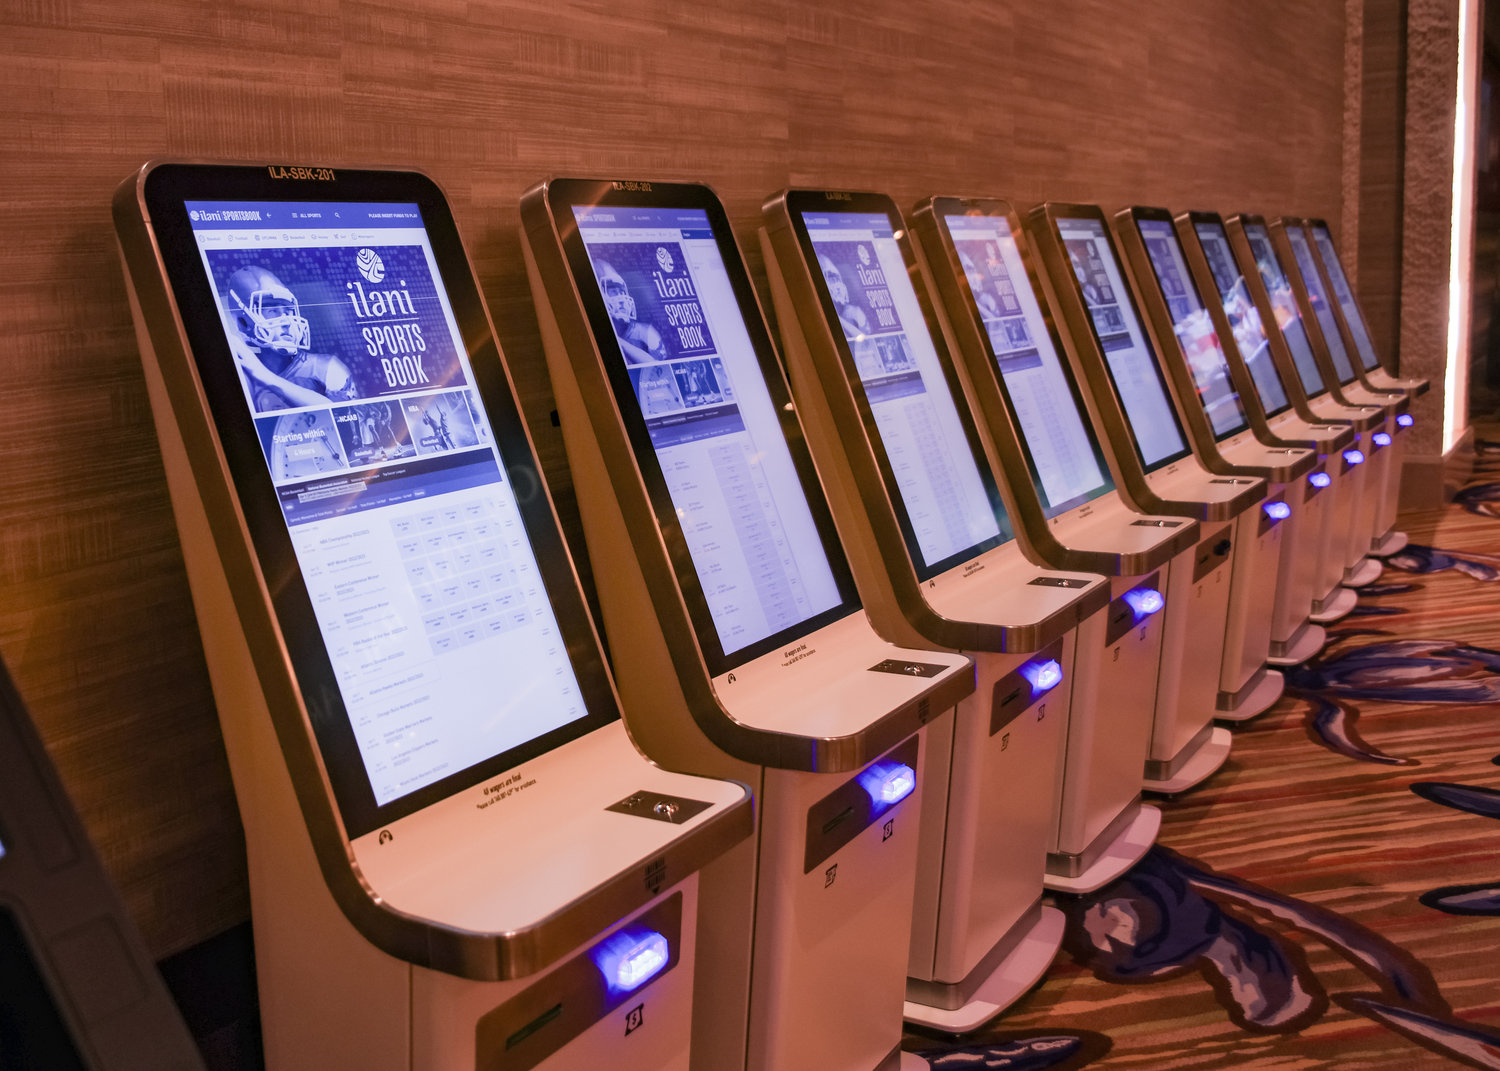 Ten sports betting kiosks have accounted for over 50% of all sports bets that have been submitted through ilani. The kiosks are seen during the morning of Friday March 24.